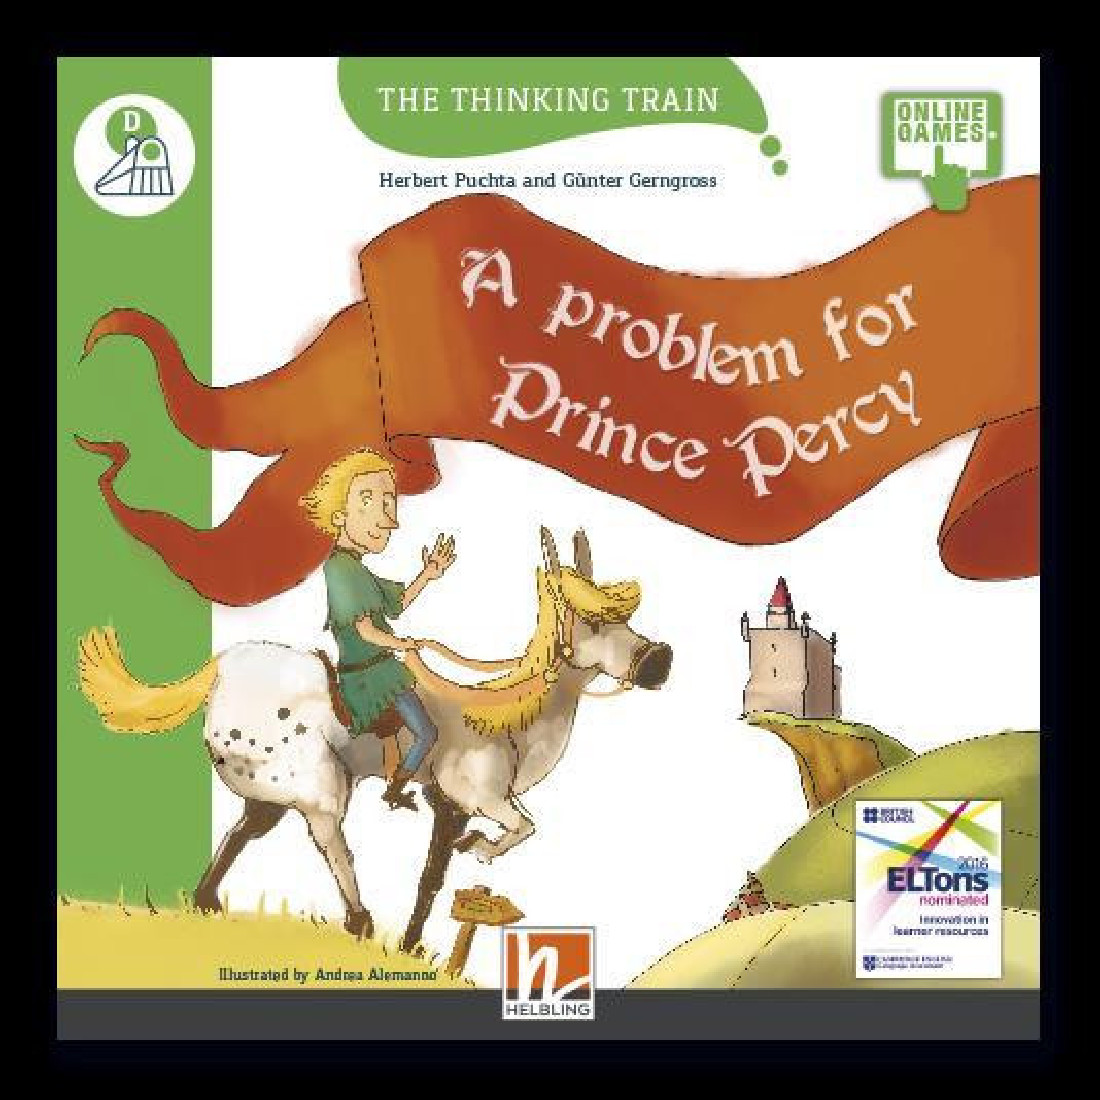 The Thinking Train A PROBLEM FOR PRINCE PERCY - READER + ACCESS CODE (THE THINKING TRAIN D)